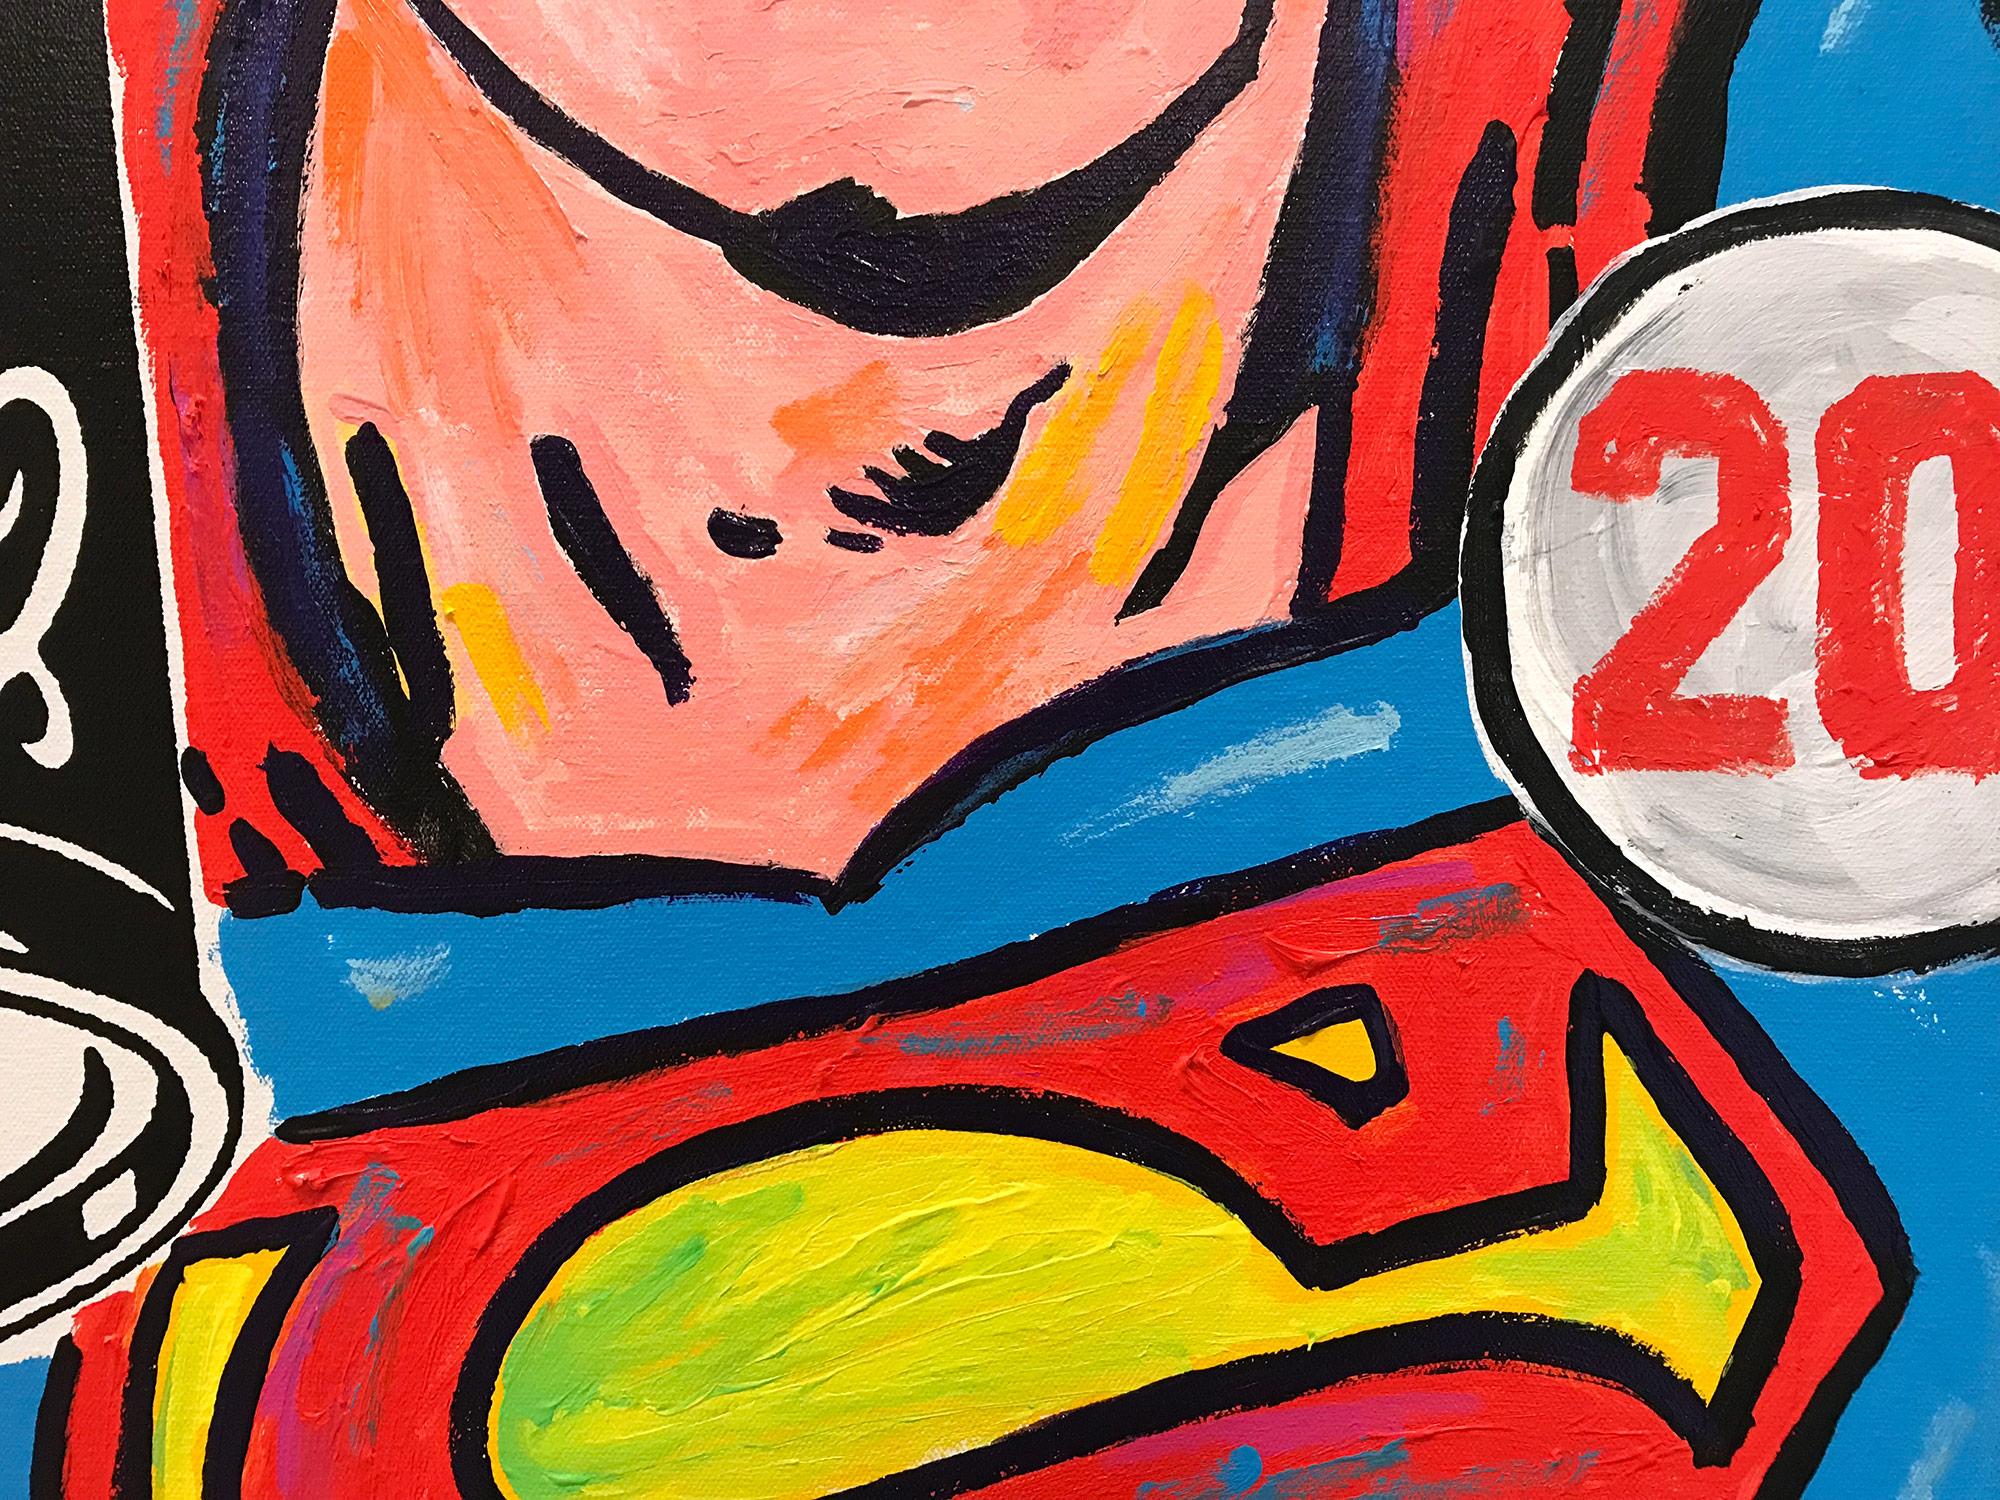 A pop piece depicting Superman juxtaposed with the and upside down Campbells Tomato Soup. With impasto painting, and quick brushwork we are drawn to the movement, as the artist is able to engage his viewer with contrasting highlights and shadow.